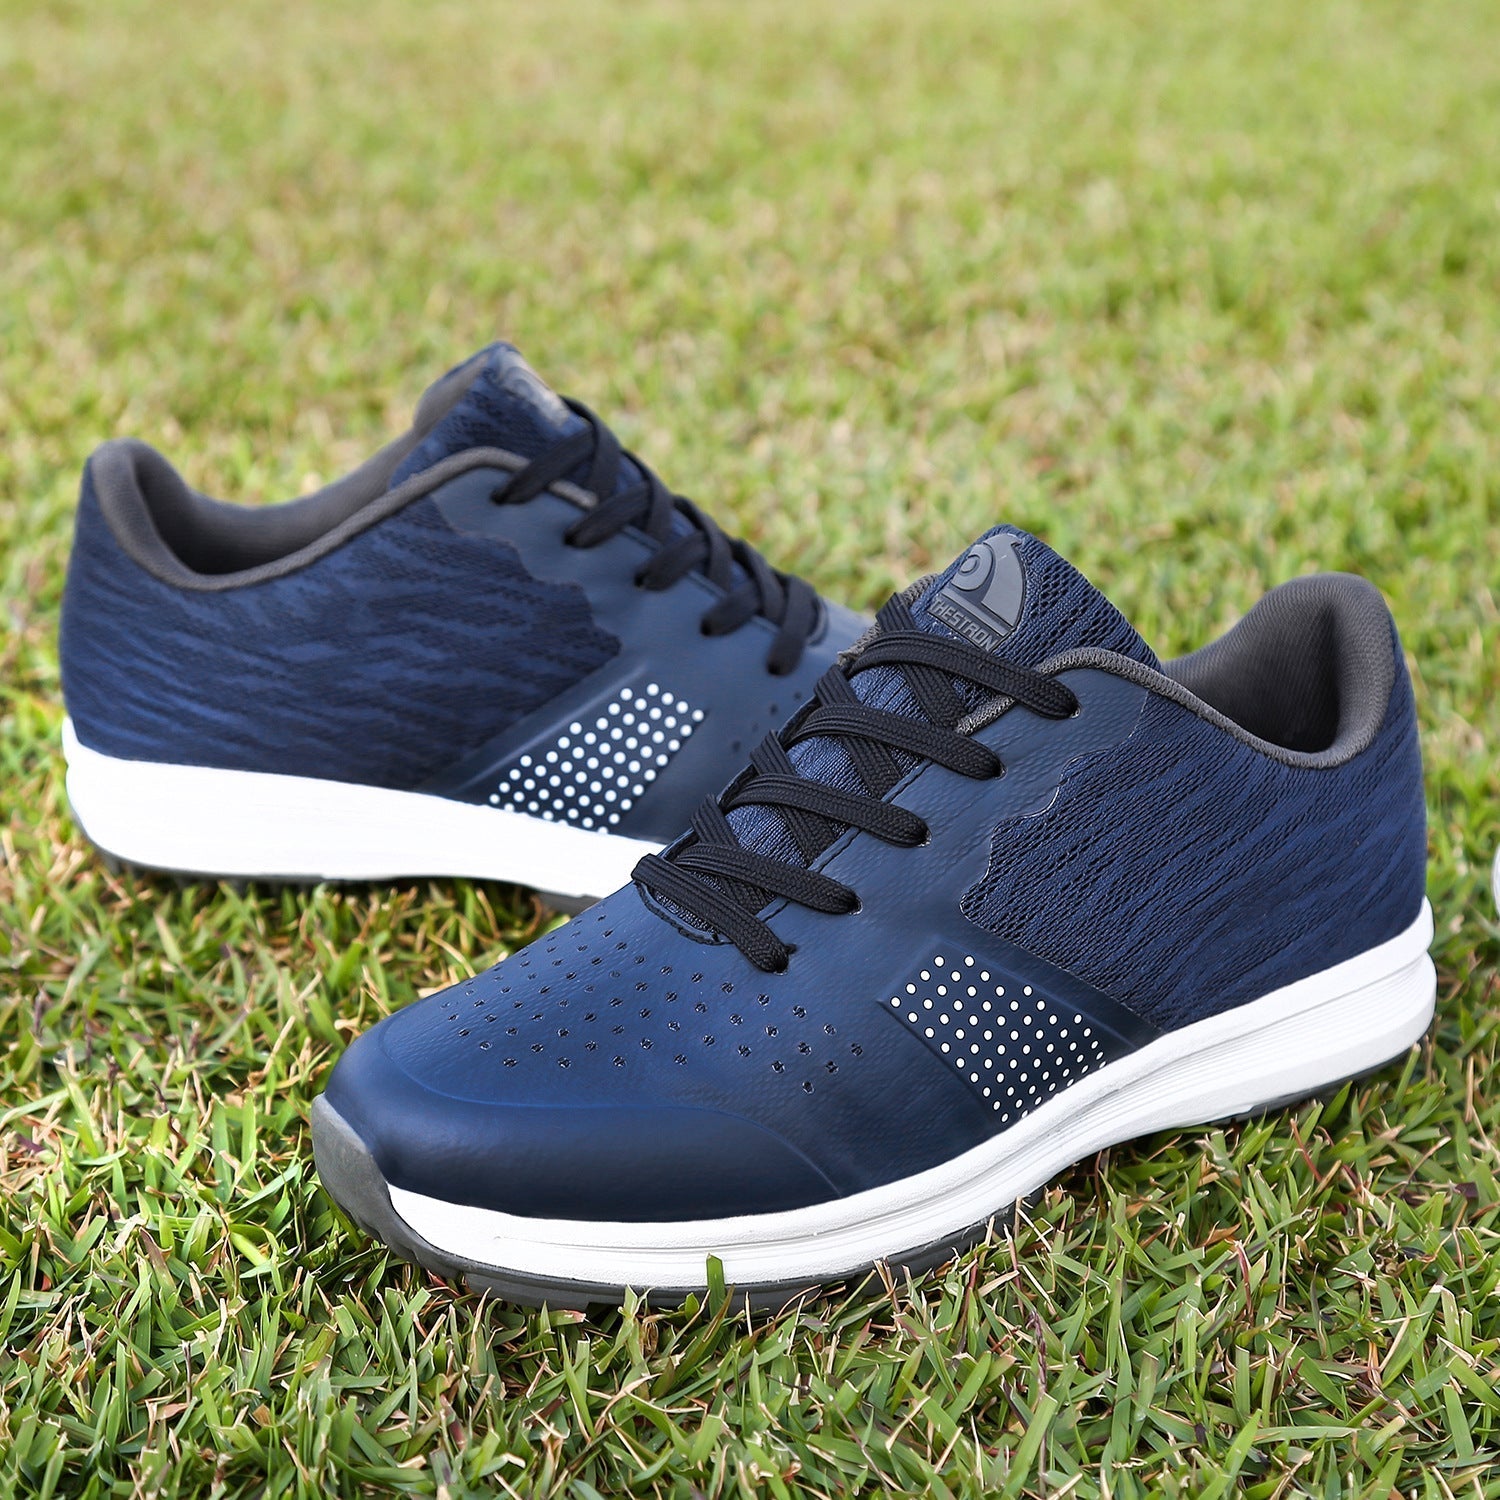 Waterproof Golf Shoes Golf Training Shoes